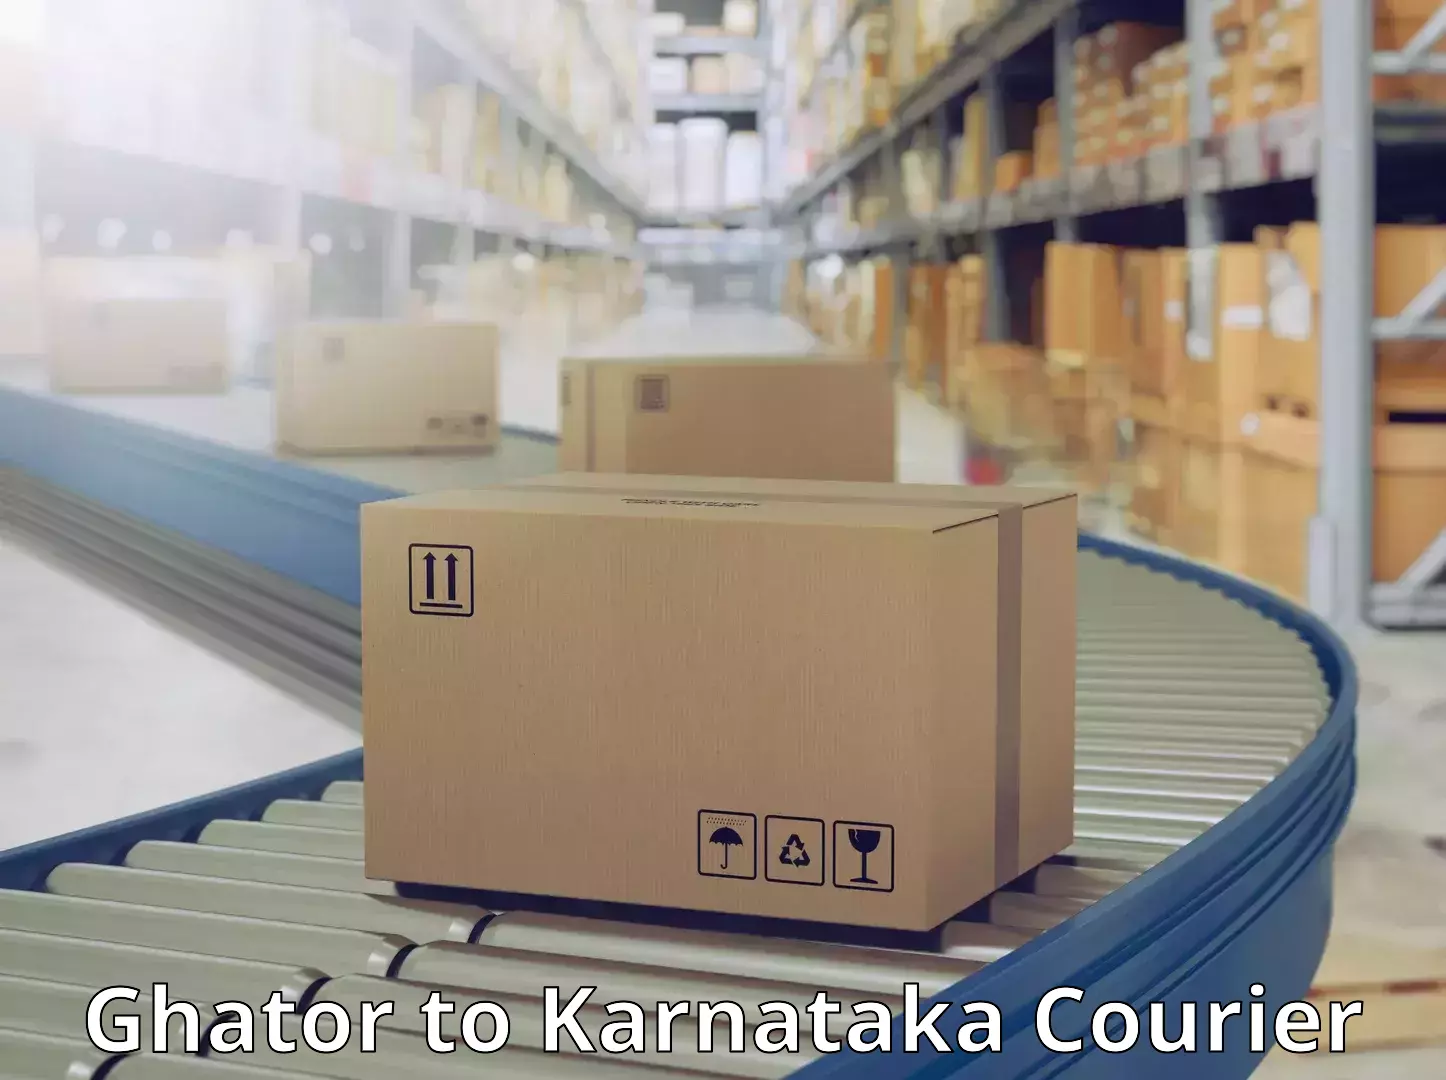 State-of-the-art courier technology Ghator to Kalaburagi